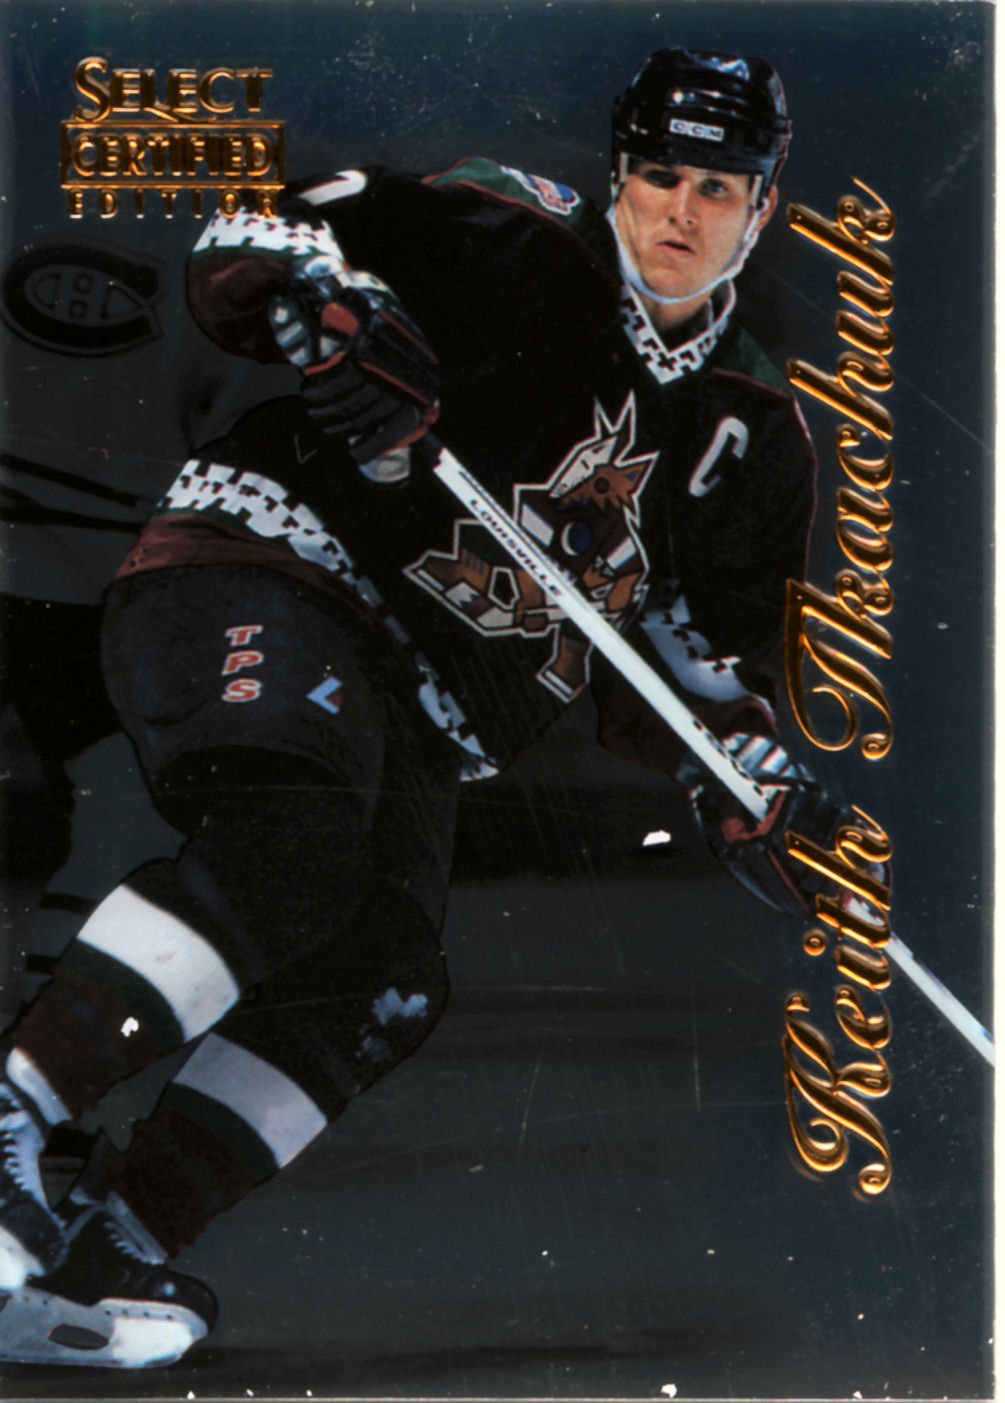 Select Certified 1996-97 hockey card image